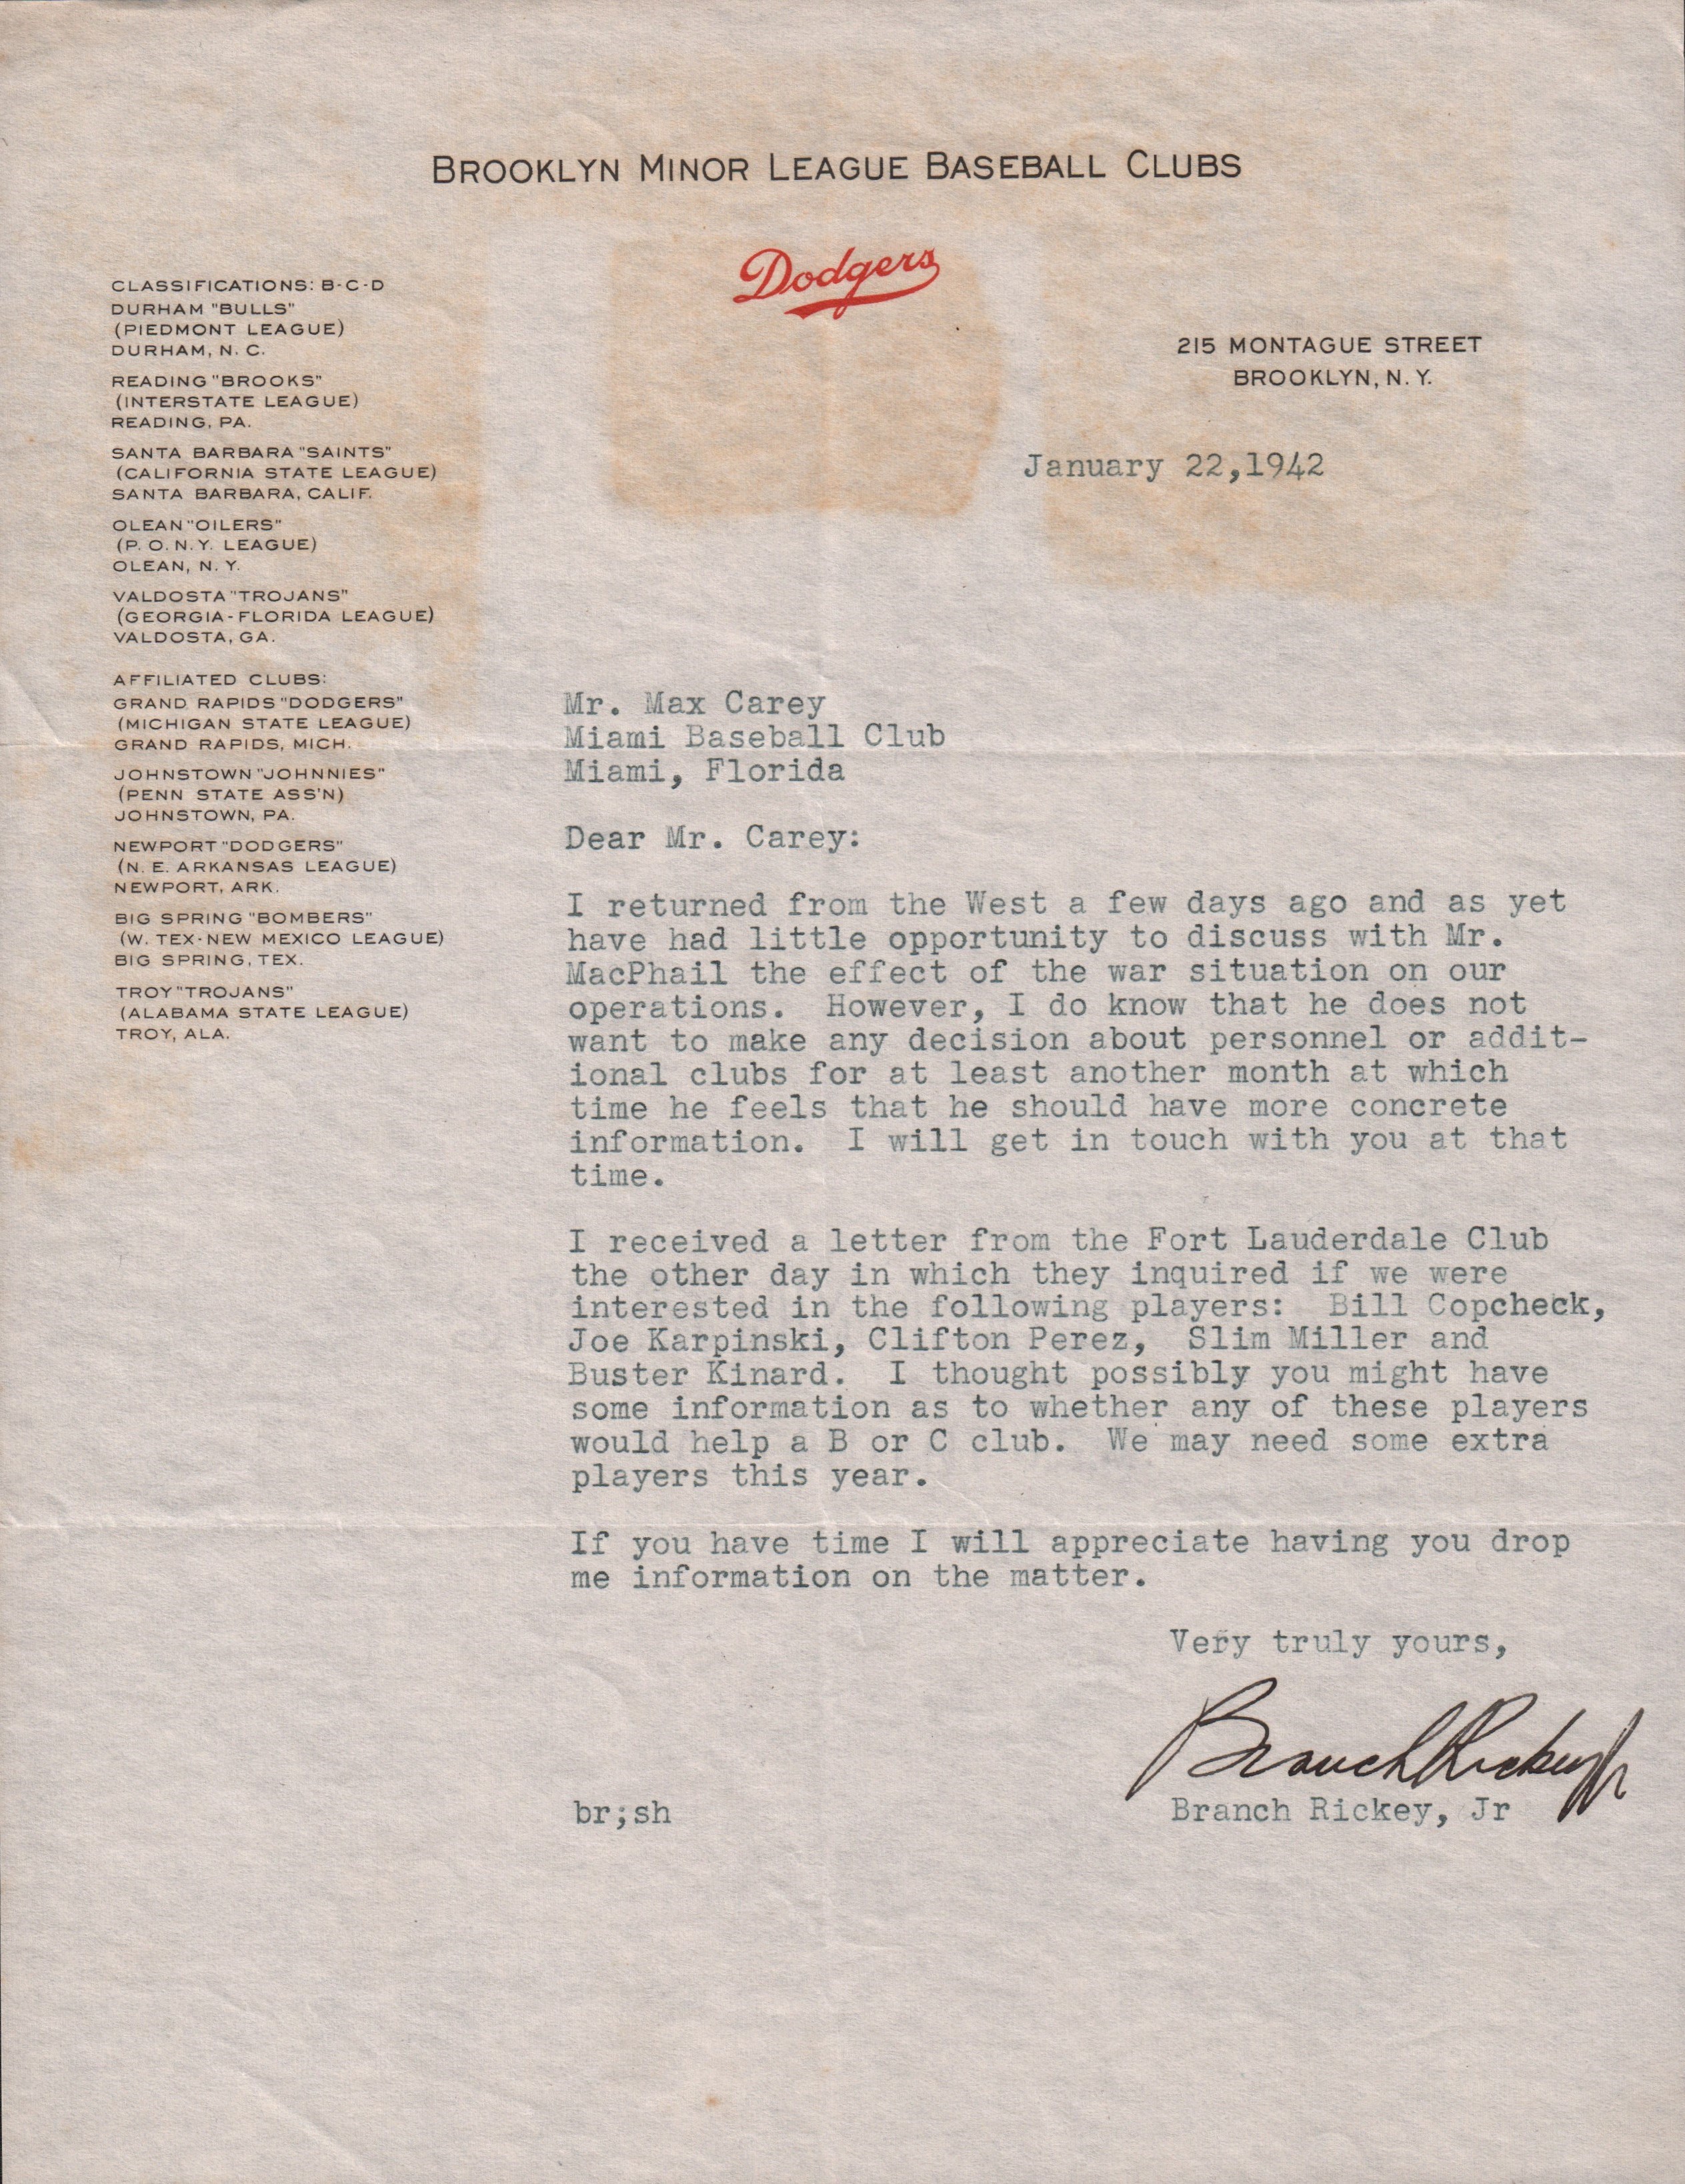 Jackie Robinson & Brooklyn Dodgers - Two Branch Rickey Jr. Letters to Max Carey